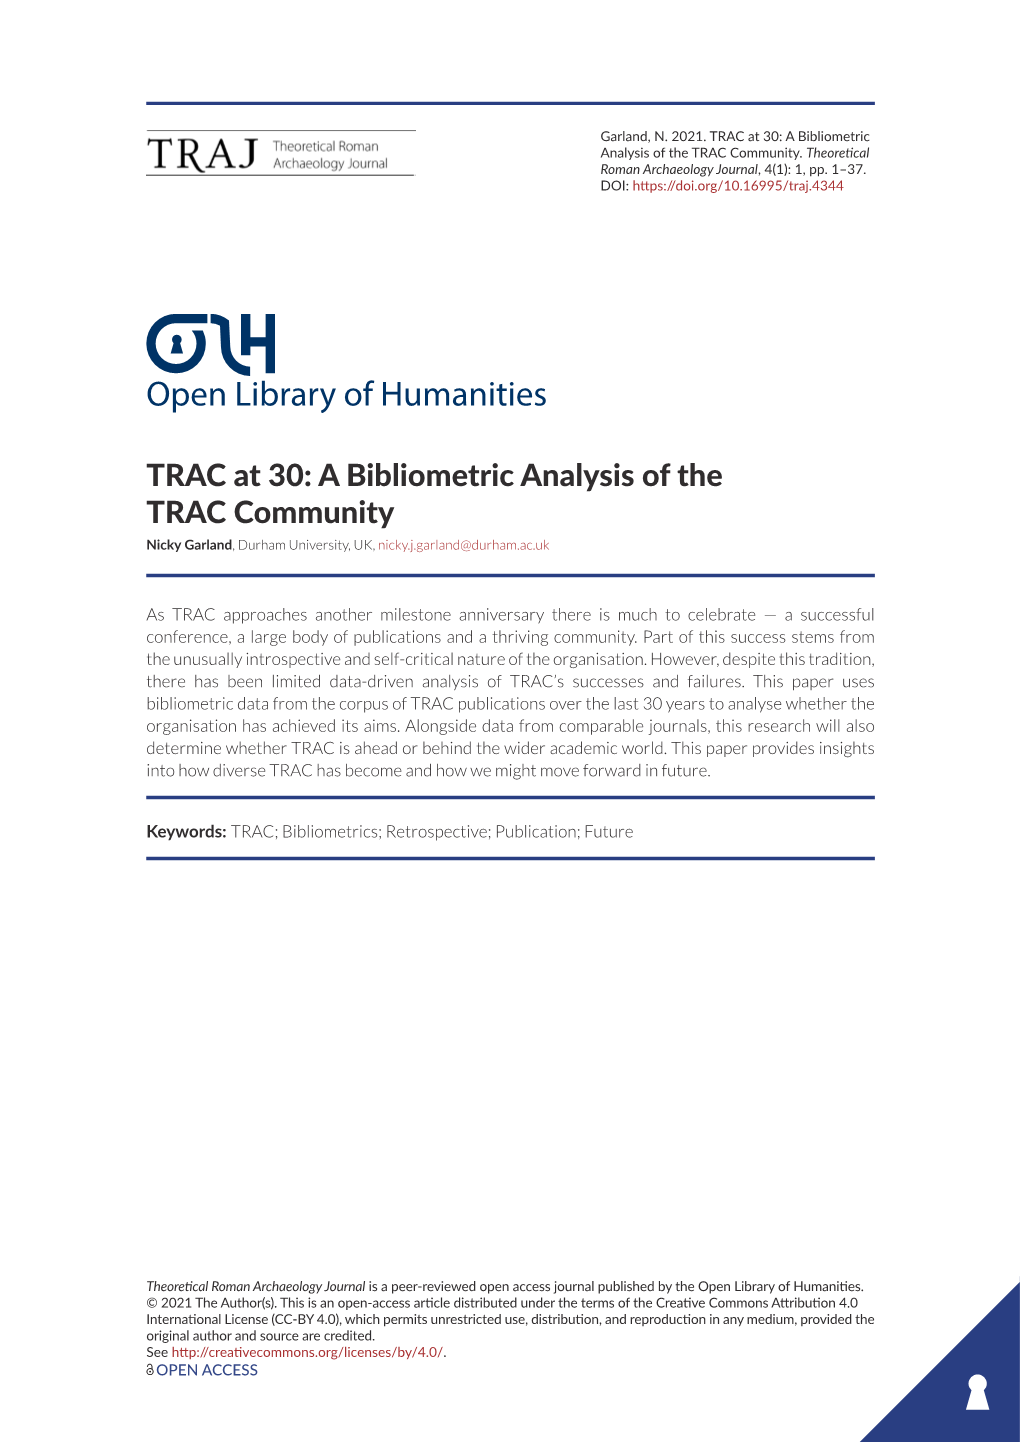 TRAC at 30: a Bibliometric Analysis of the TRAC Community